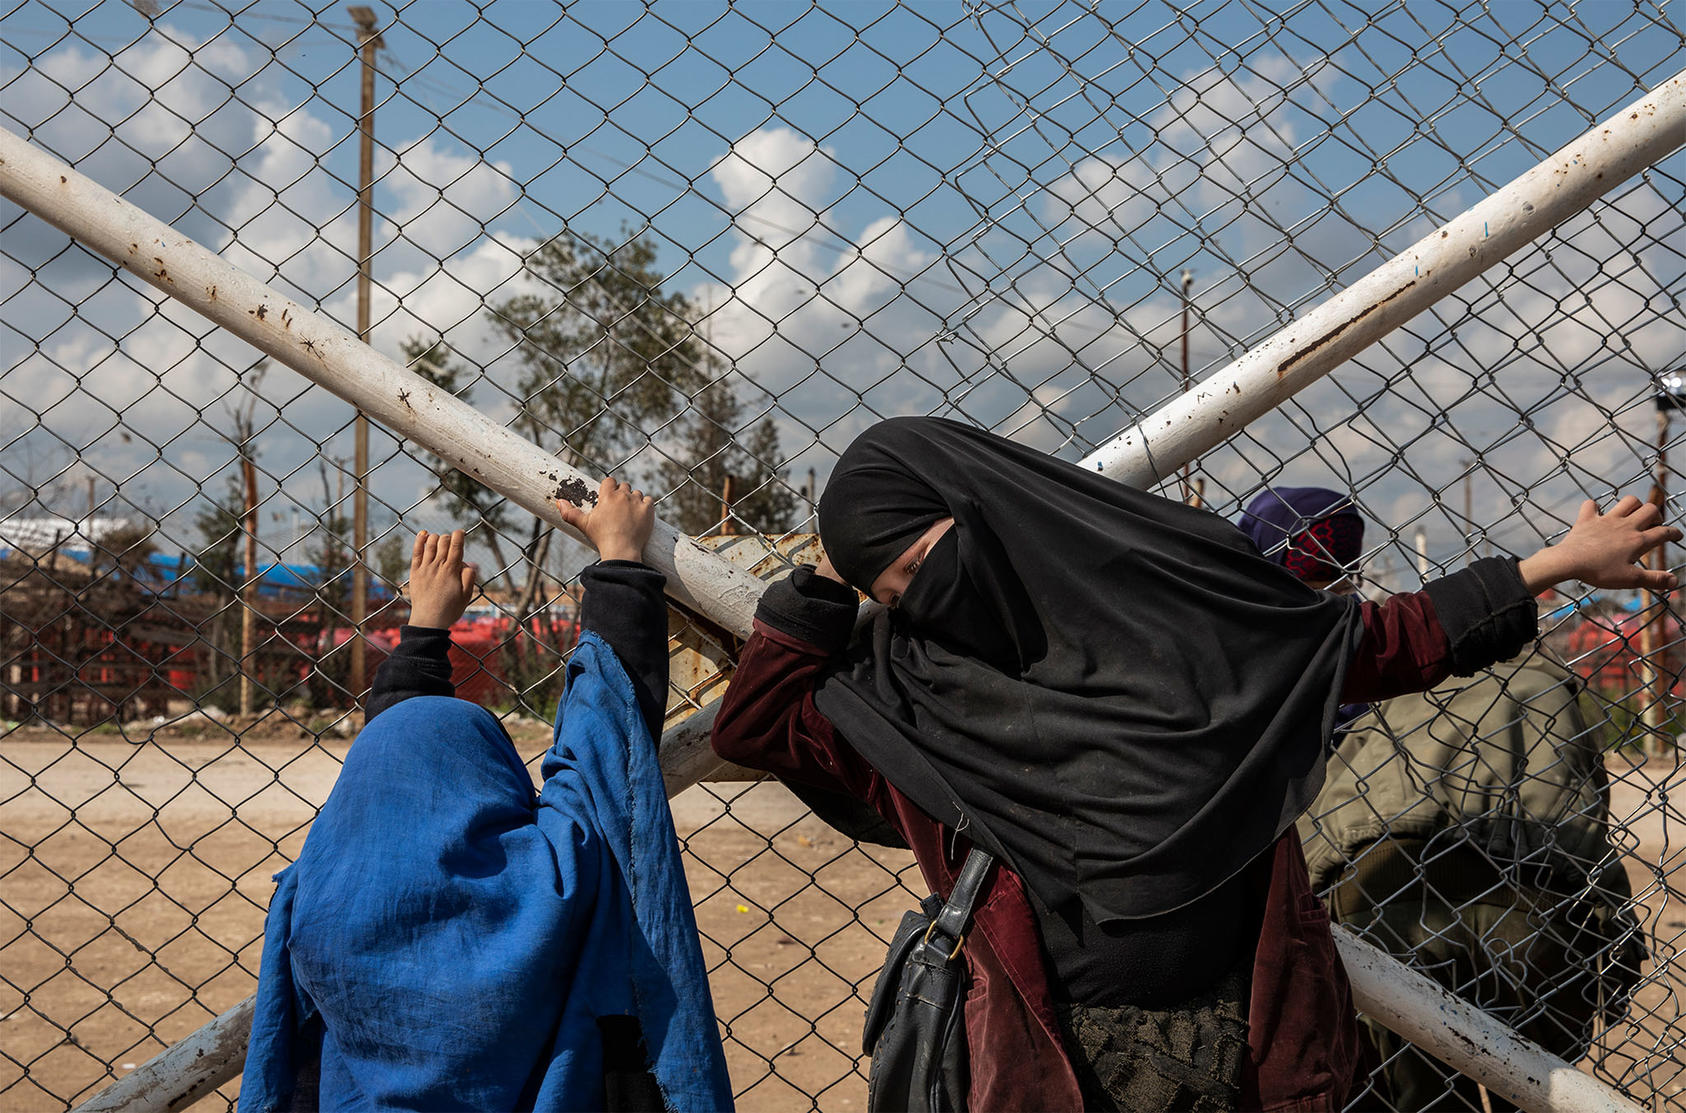 A girl and woman at the fence of the al Hol camp are among thousands who lived under ISIS’ rule. Many are stranded in the camp’s ISIS-influenced environment as governments decline to repatriate them. (Ivor Prickett/The New York Times)